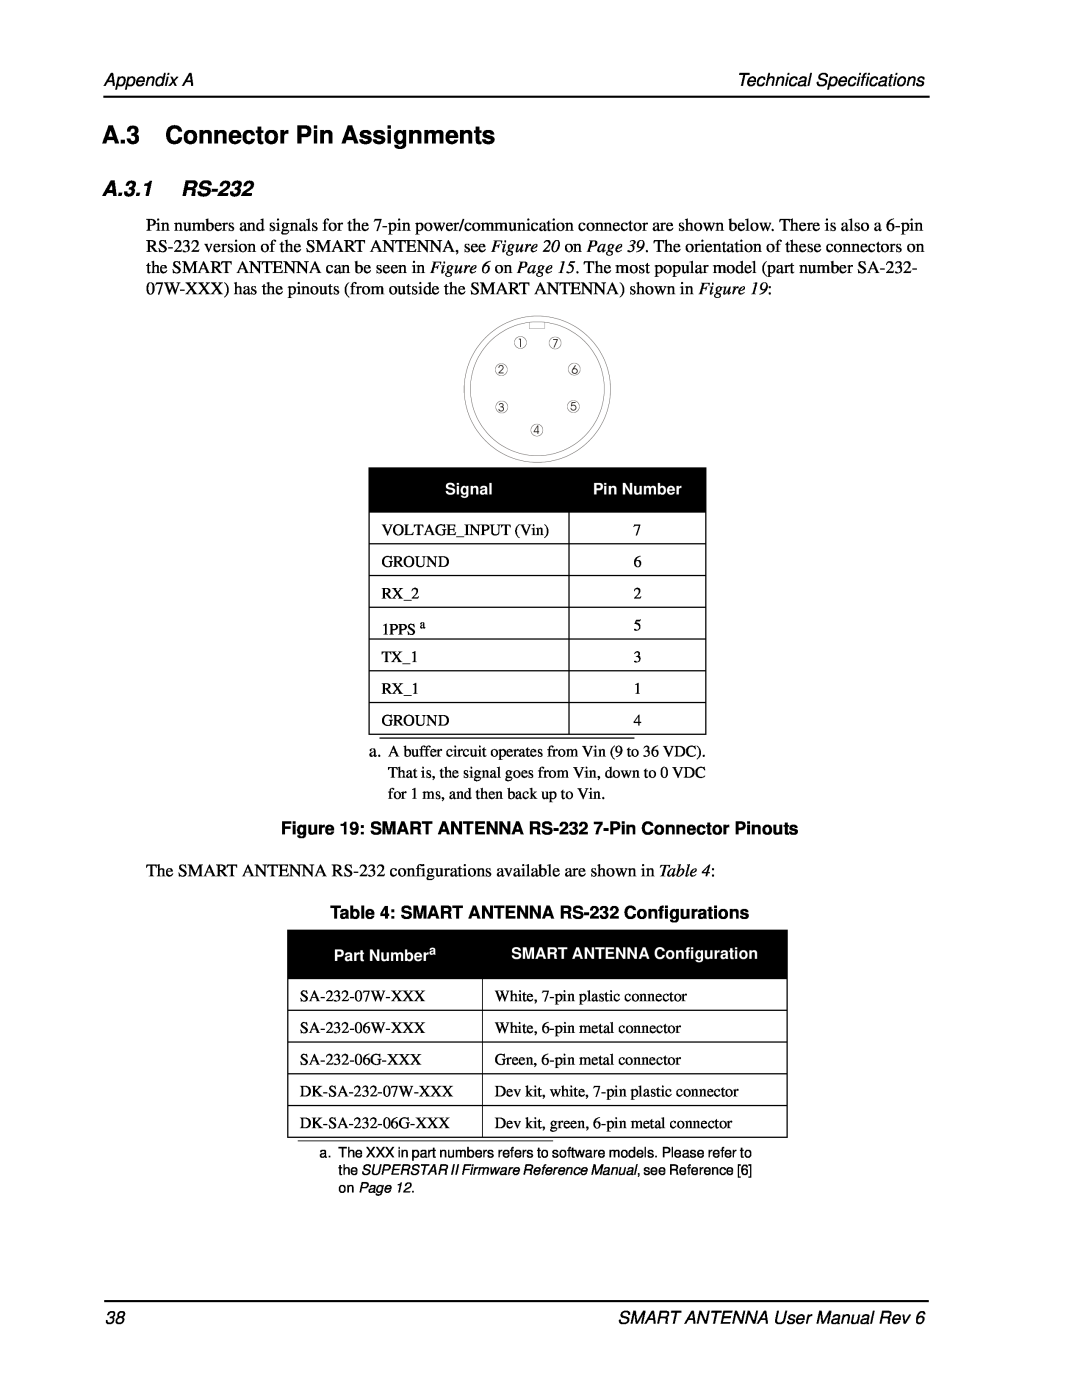 Novatel SMART ANTENNA user manual A.3 Connector Pin Assignments, A.3.1 RS-232, Appendix A, Technical Specifications 